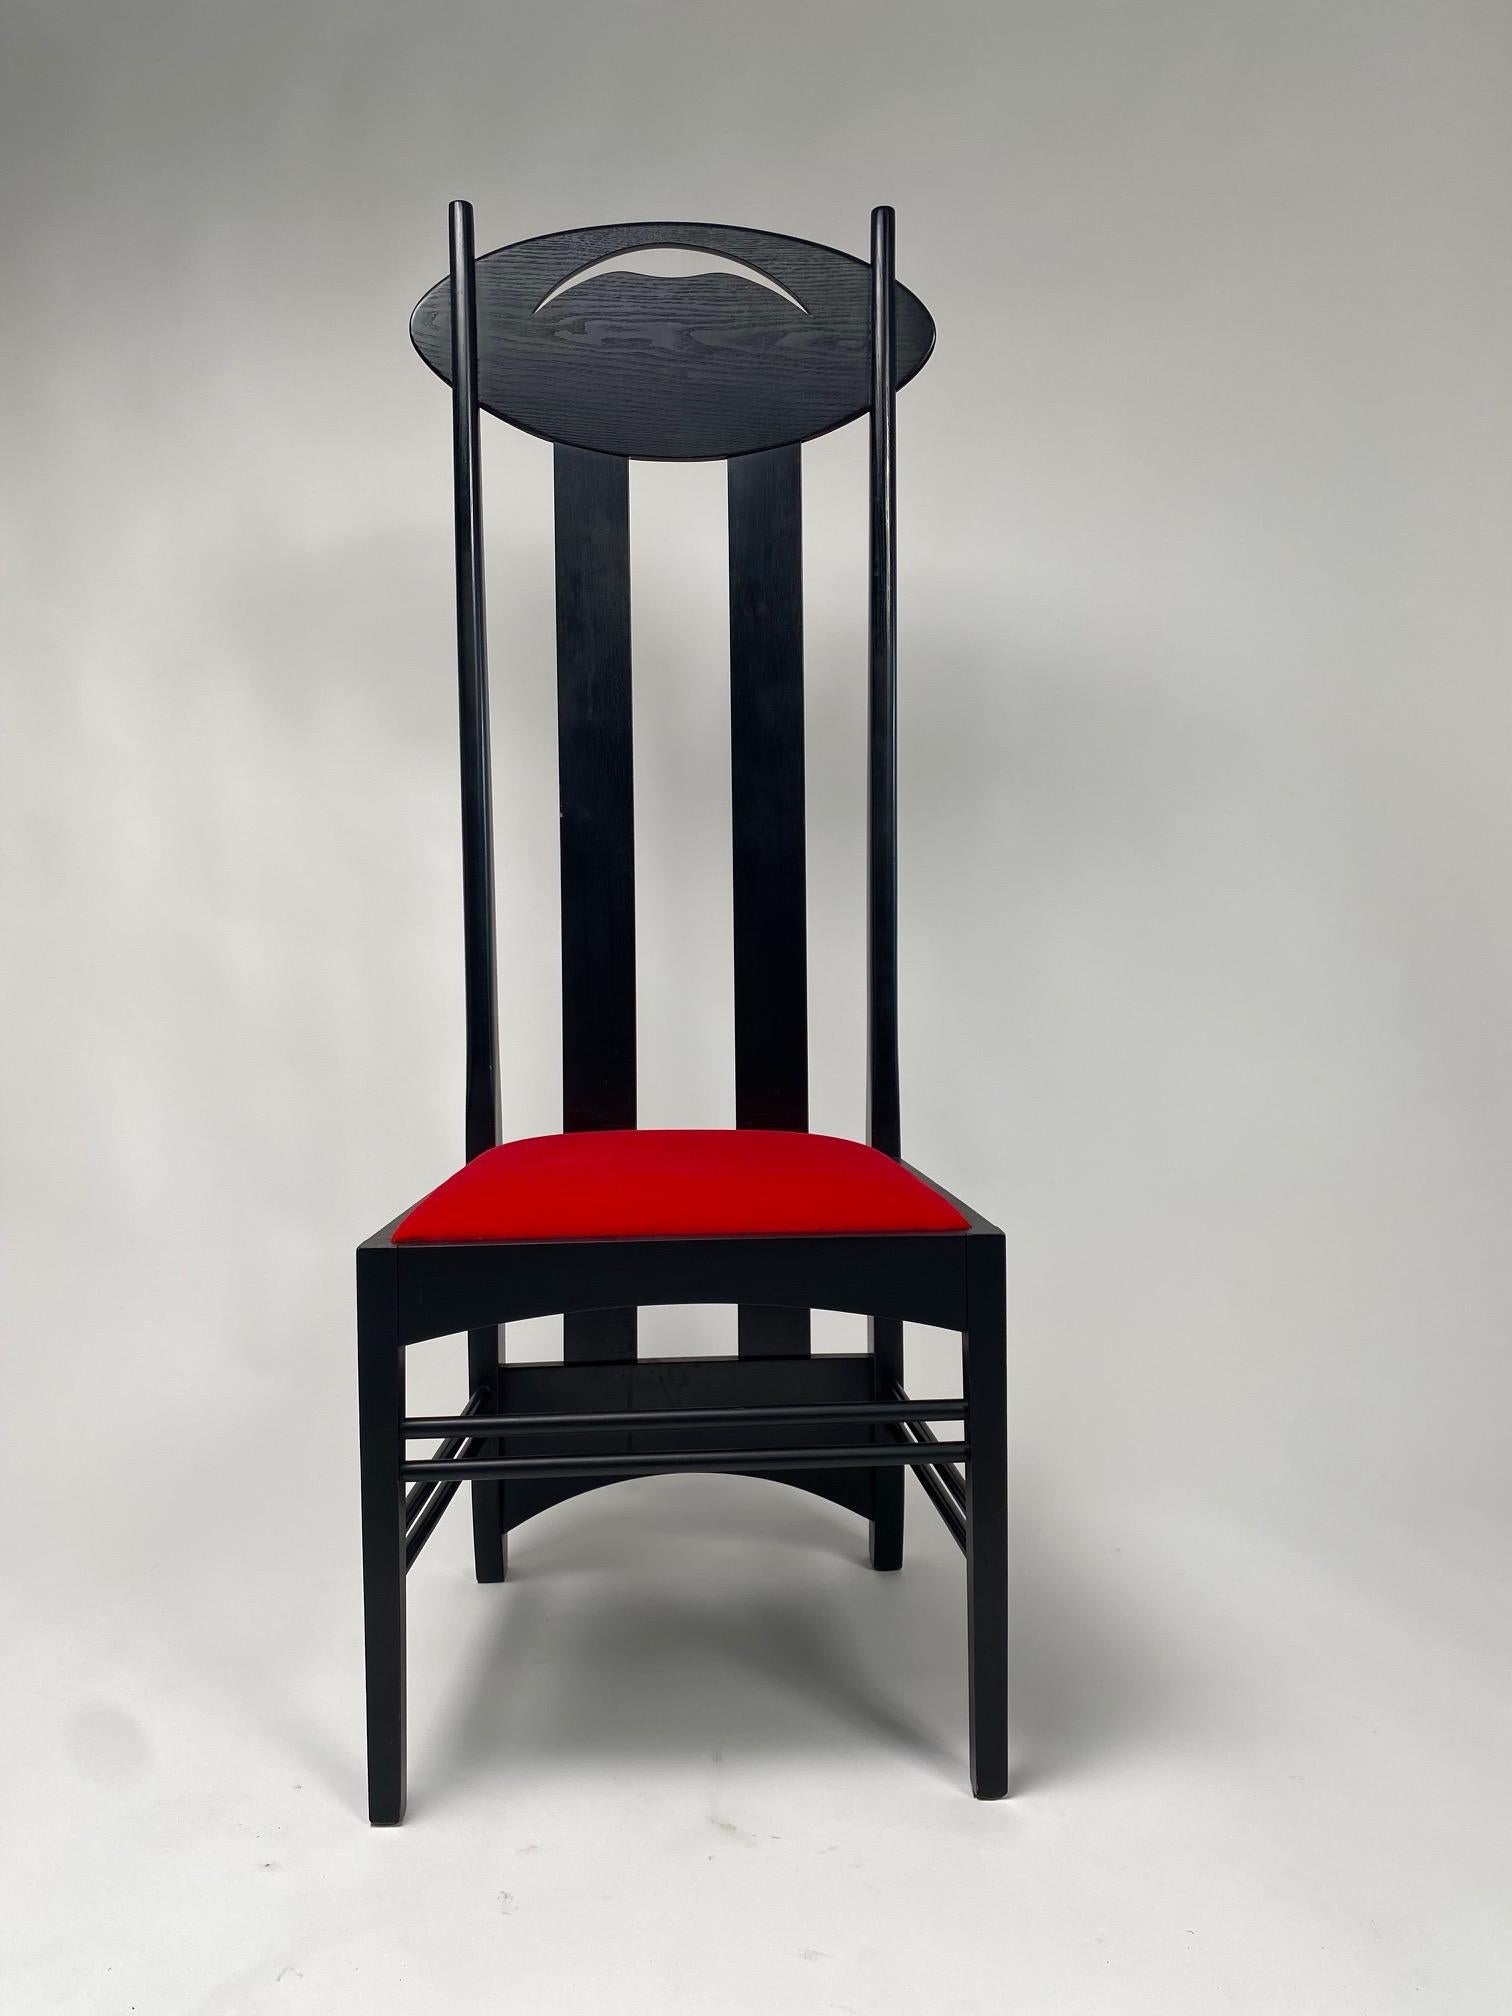 Pair of Argyle chairs by Charles Rennie Mackintosh for Atelier International, Designed 1897 and exhibited at the Eighth Secession Exhibition in Vienna, Austria in 1900,

It is one of the most iconic chairs of the famous Scottish architect, designer